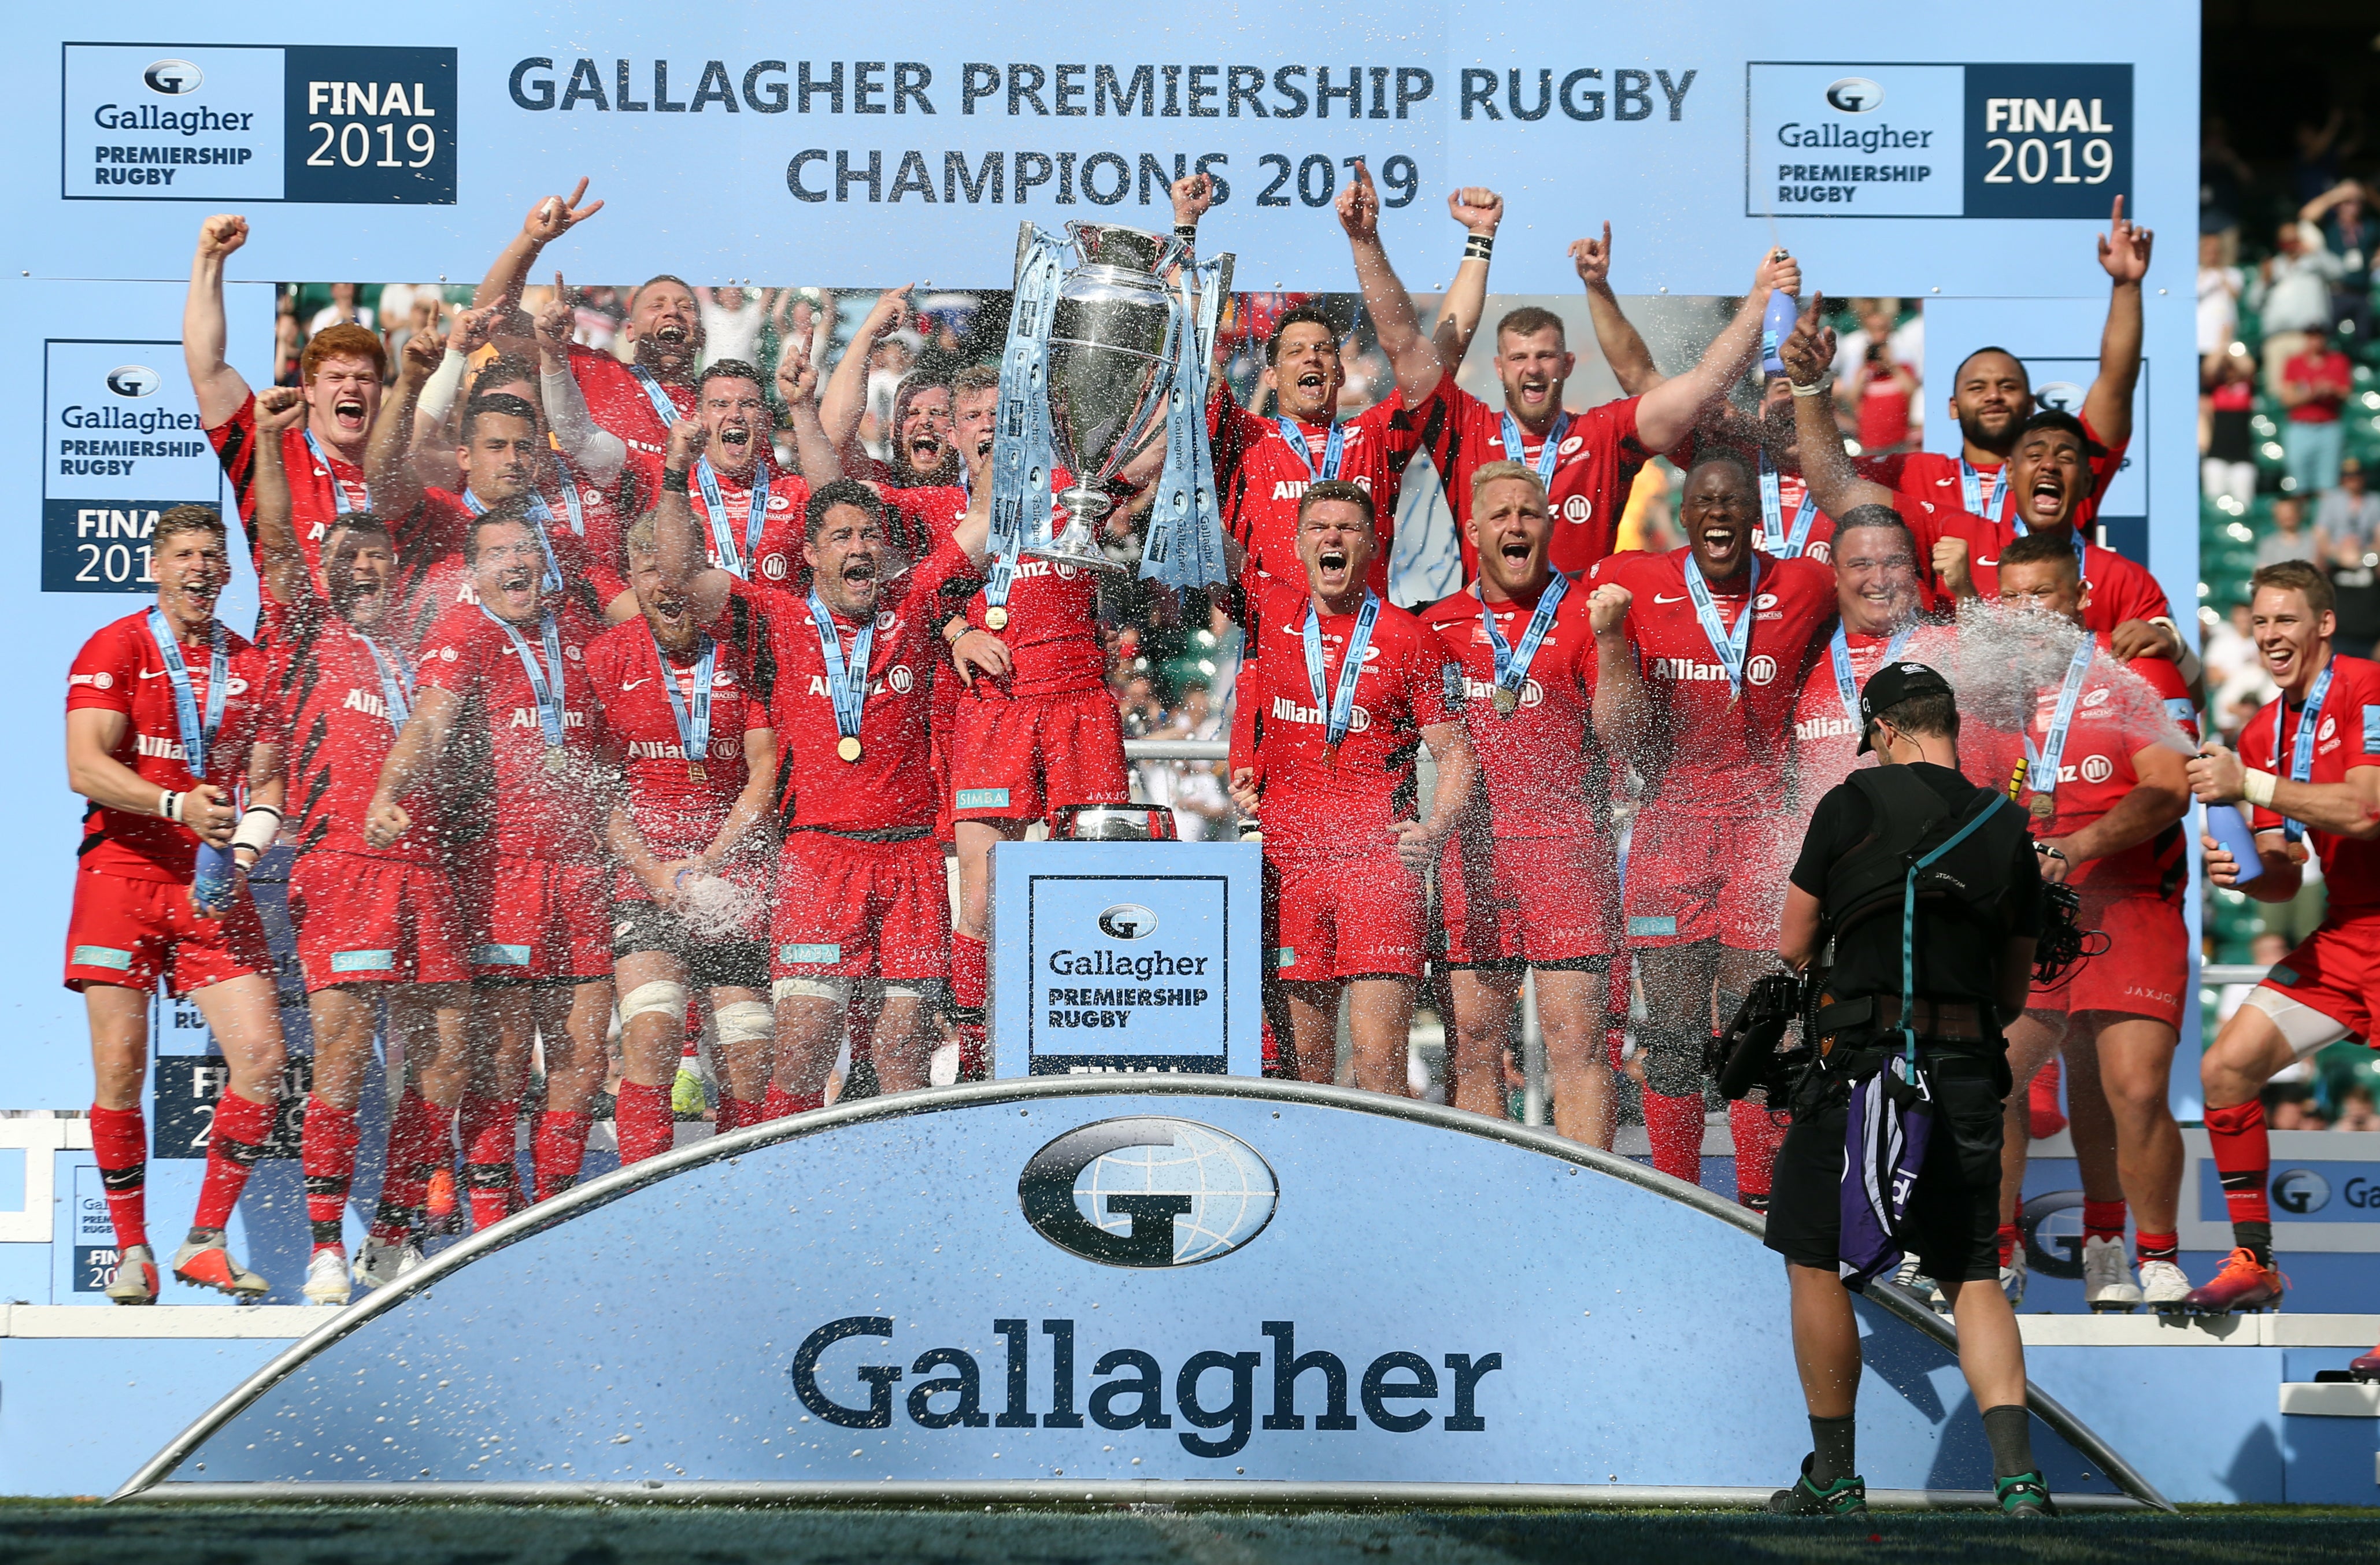 Leicester vs Saracens Talking points ahead of Premiership final The Independent